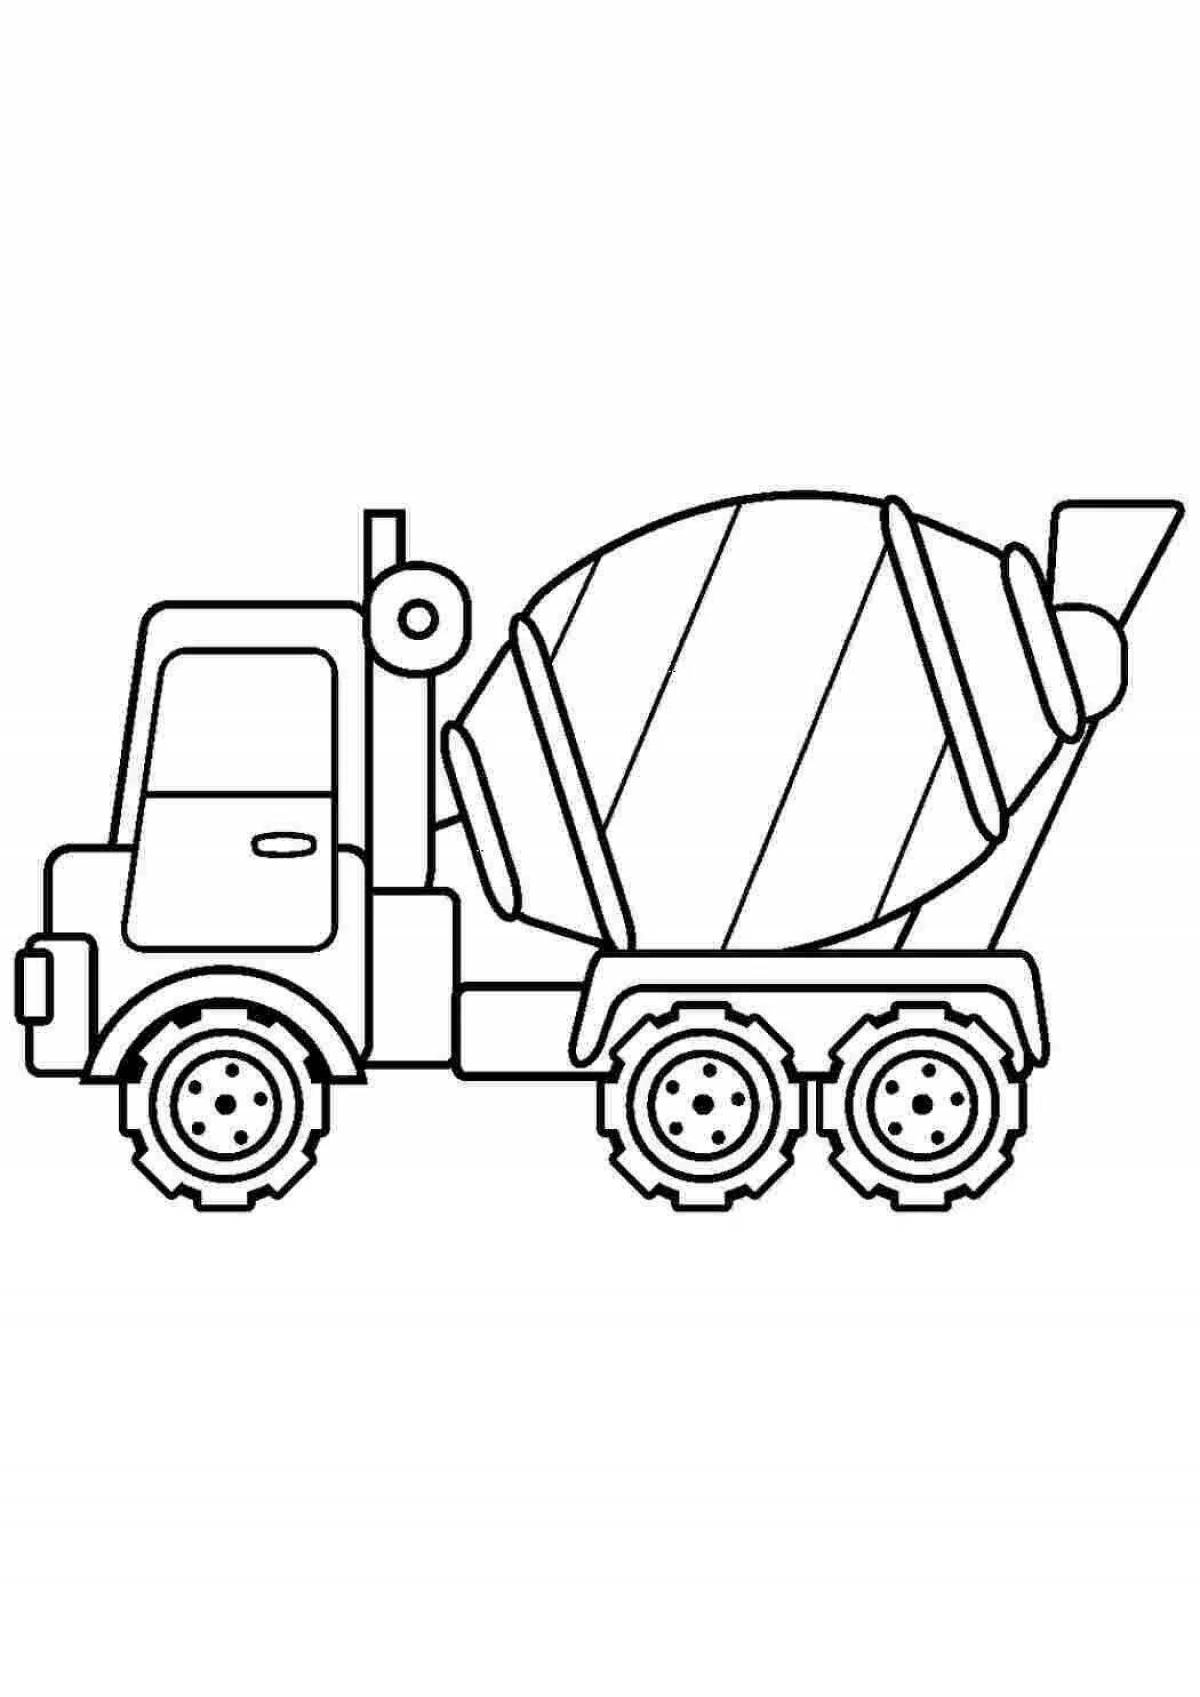 Intriguing construction vehicle coloring book for boys